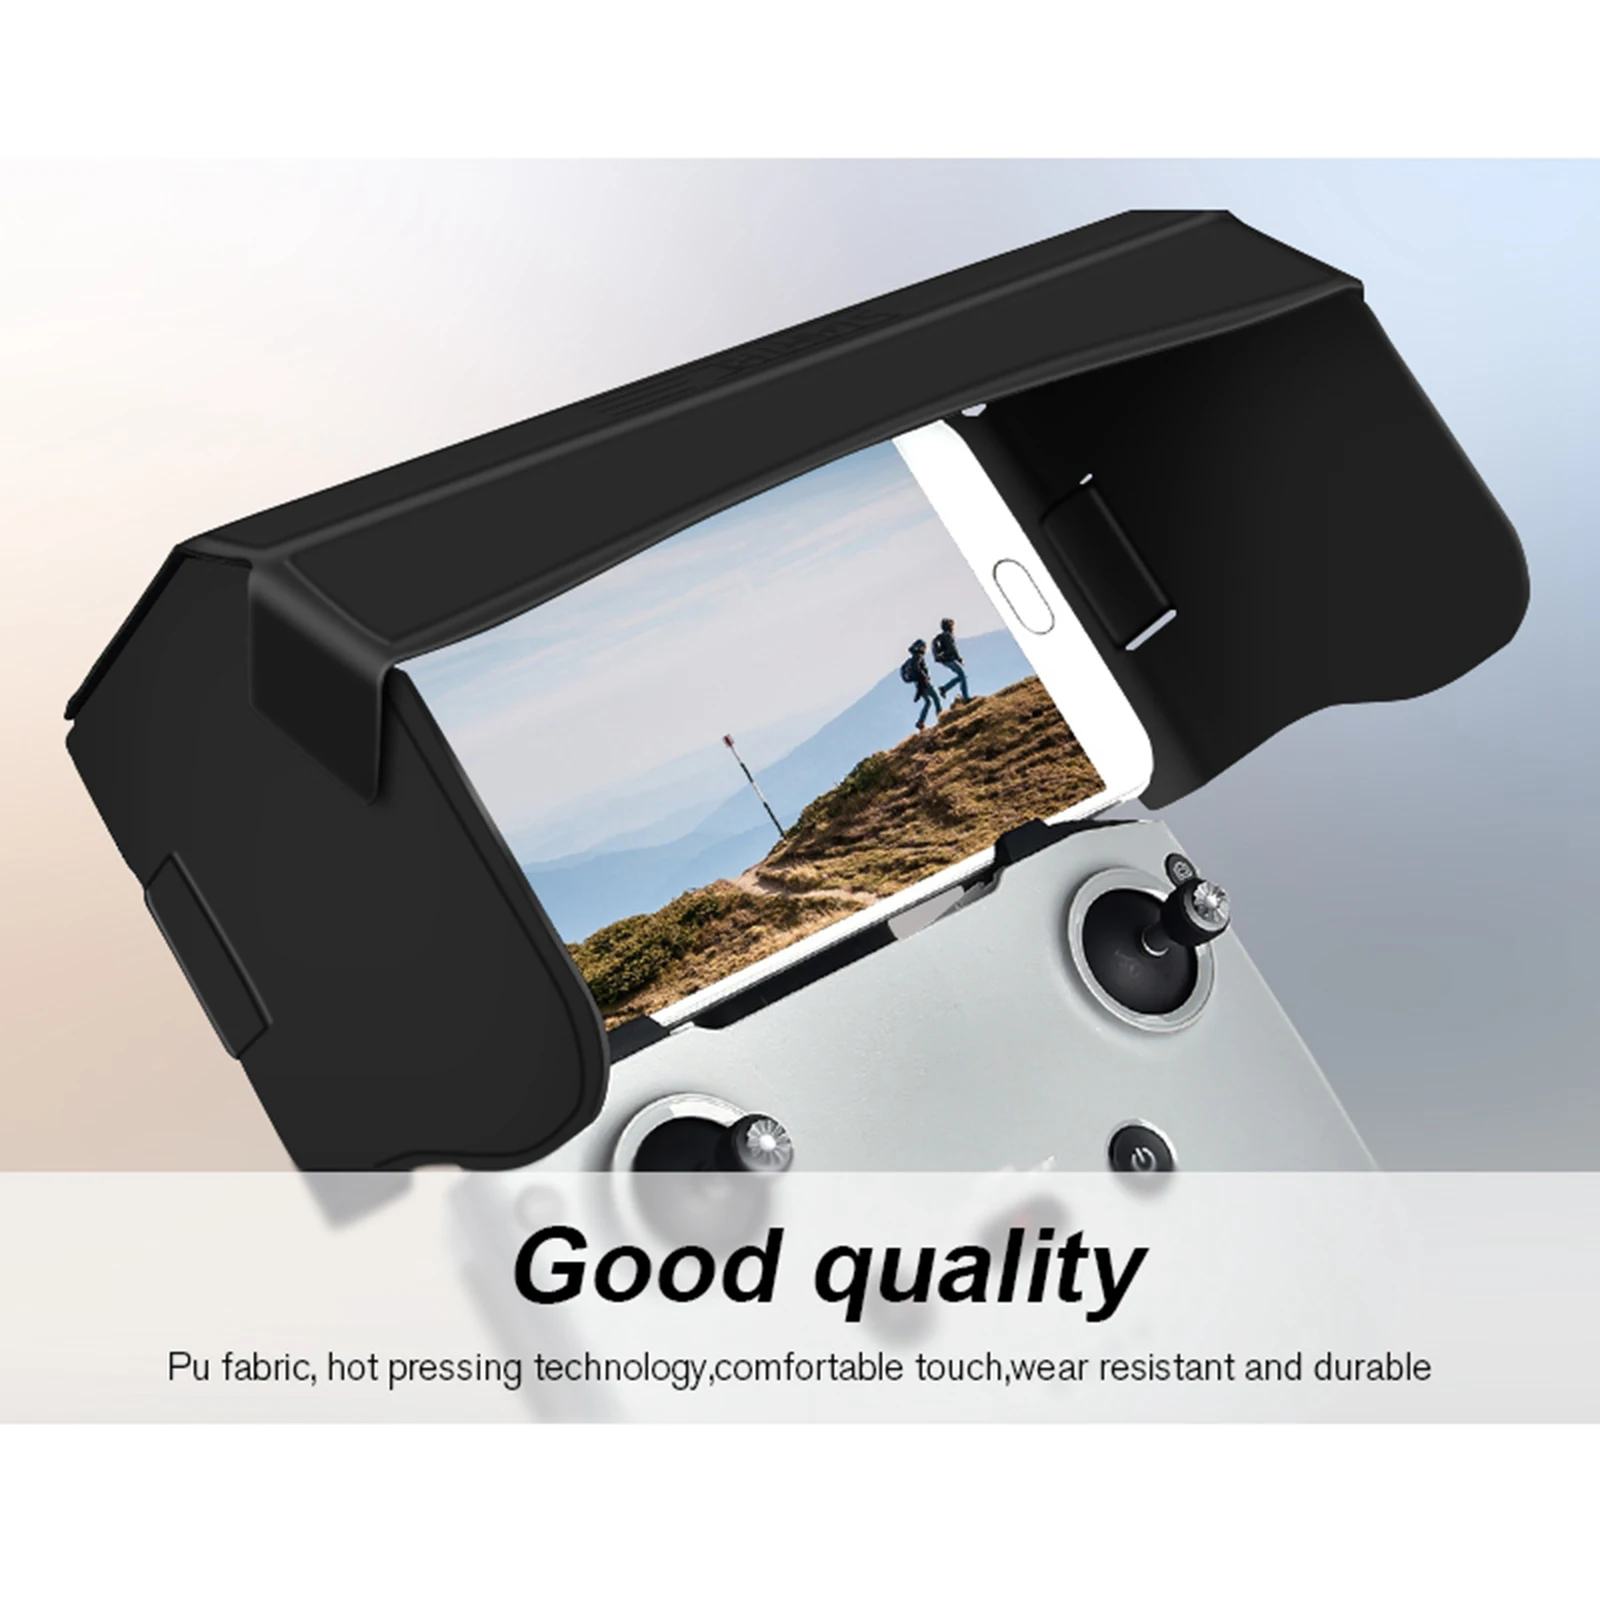 1pcs Tablets Monitor Sunshade Cellphone and Tablet, Monitor Sunshade Sun Hood Cover 18.2x10.1x1cm